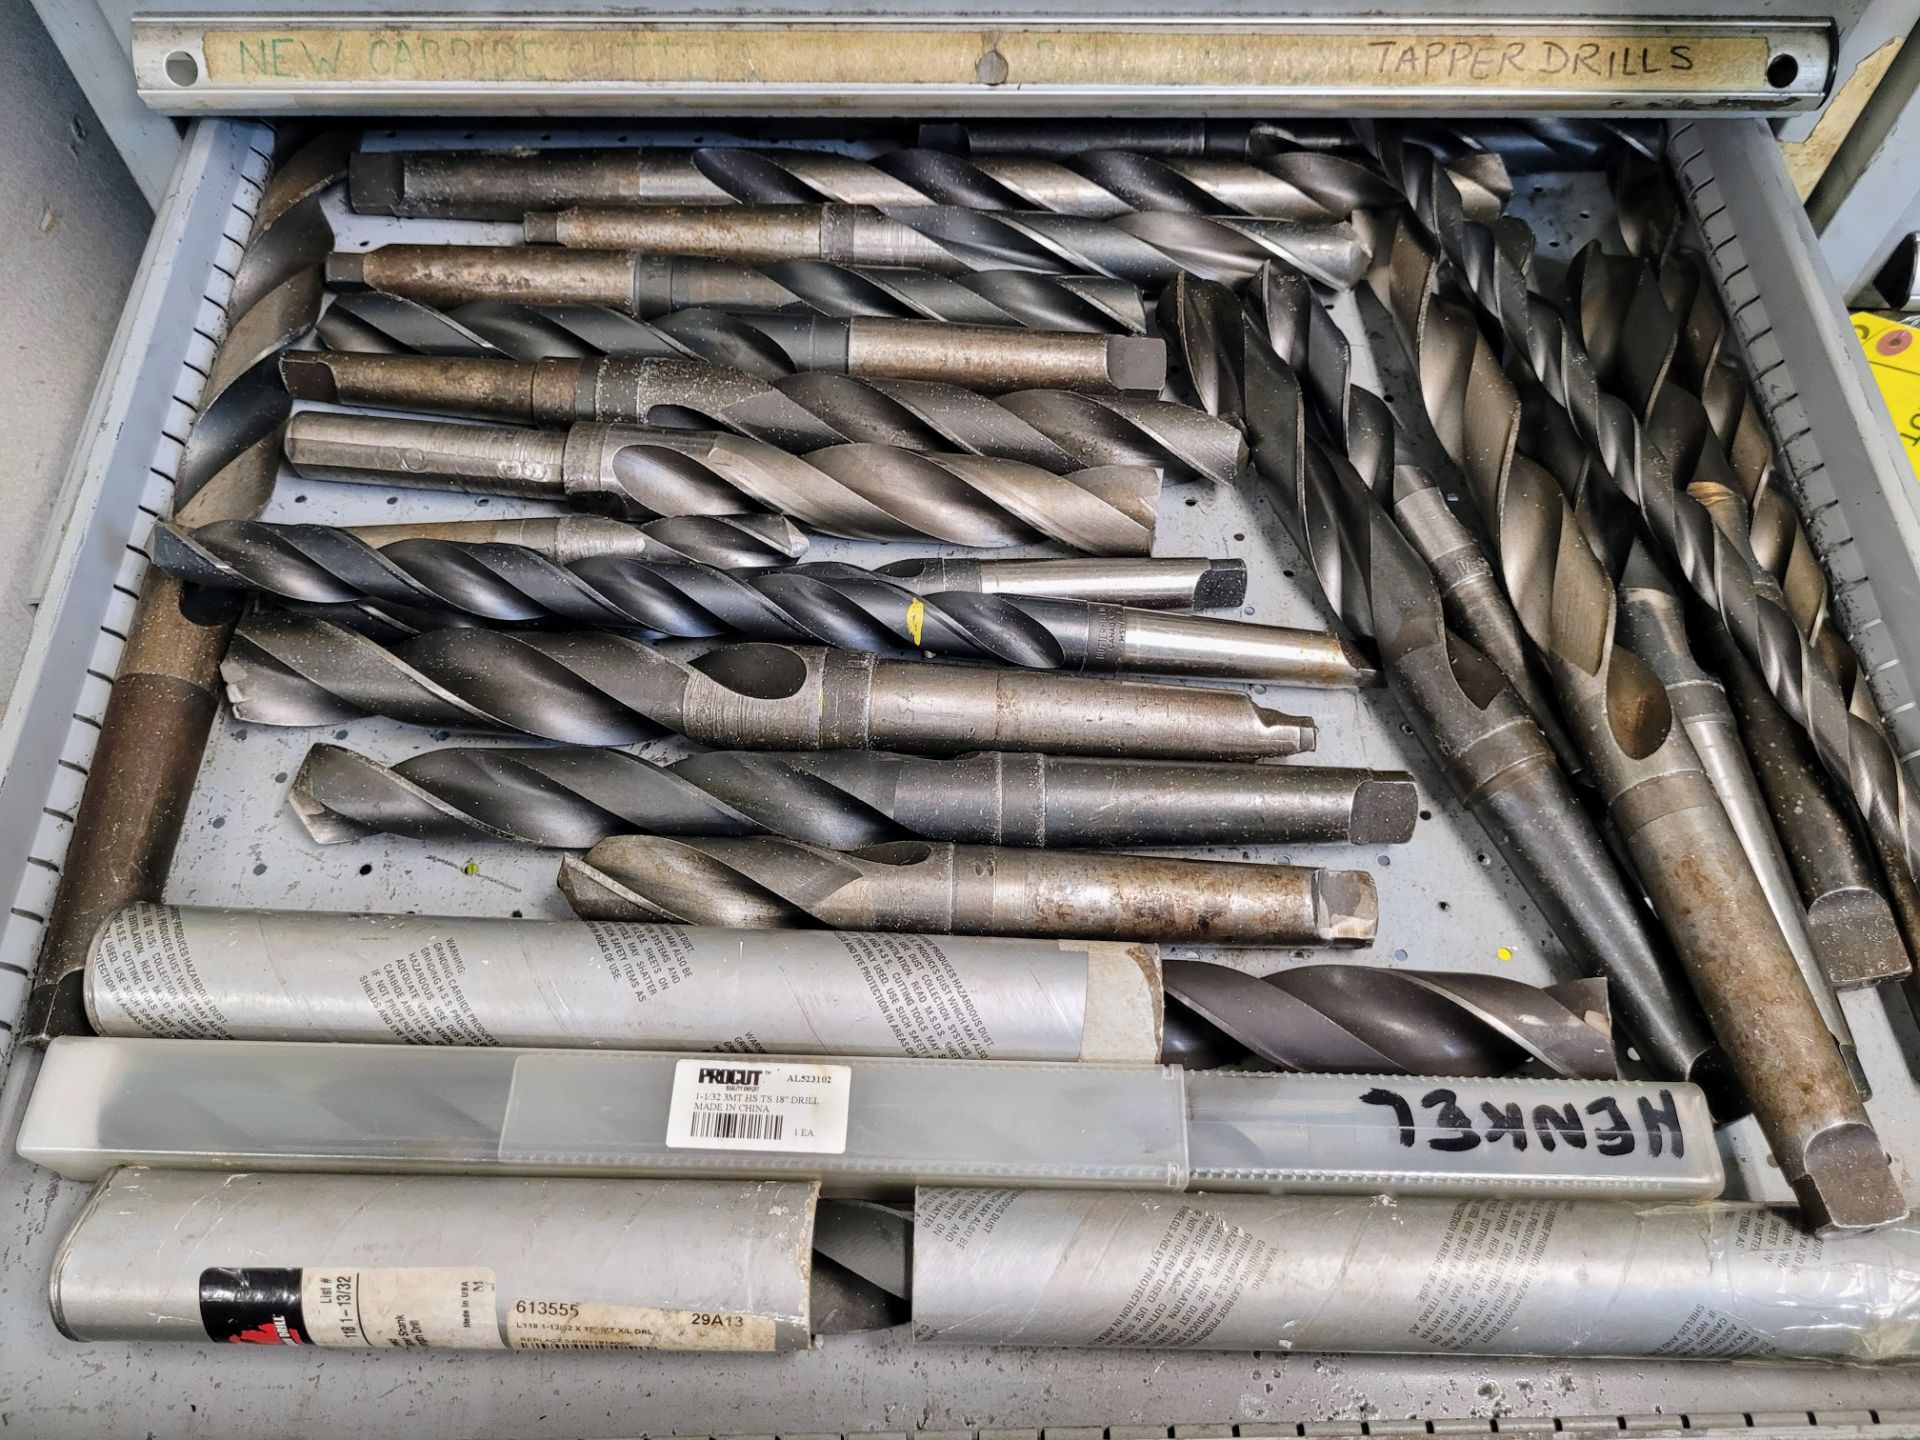 CONTENTS OF (1) TOOL CABINET DRAWER INCLUDING BORING DRILLS, ETC. (NO DRAWERS)